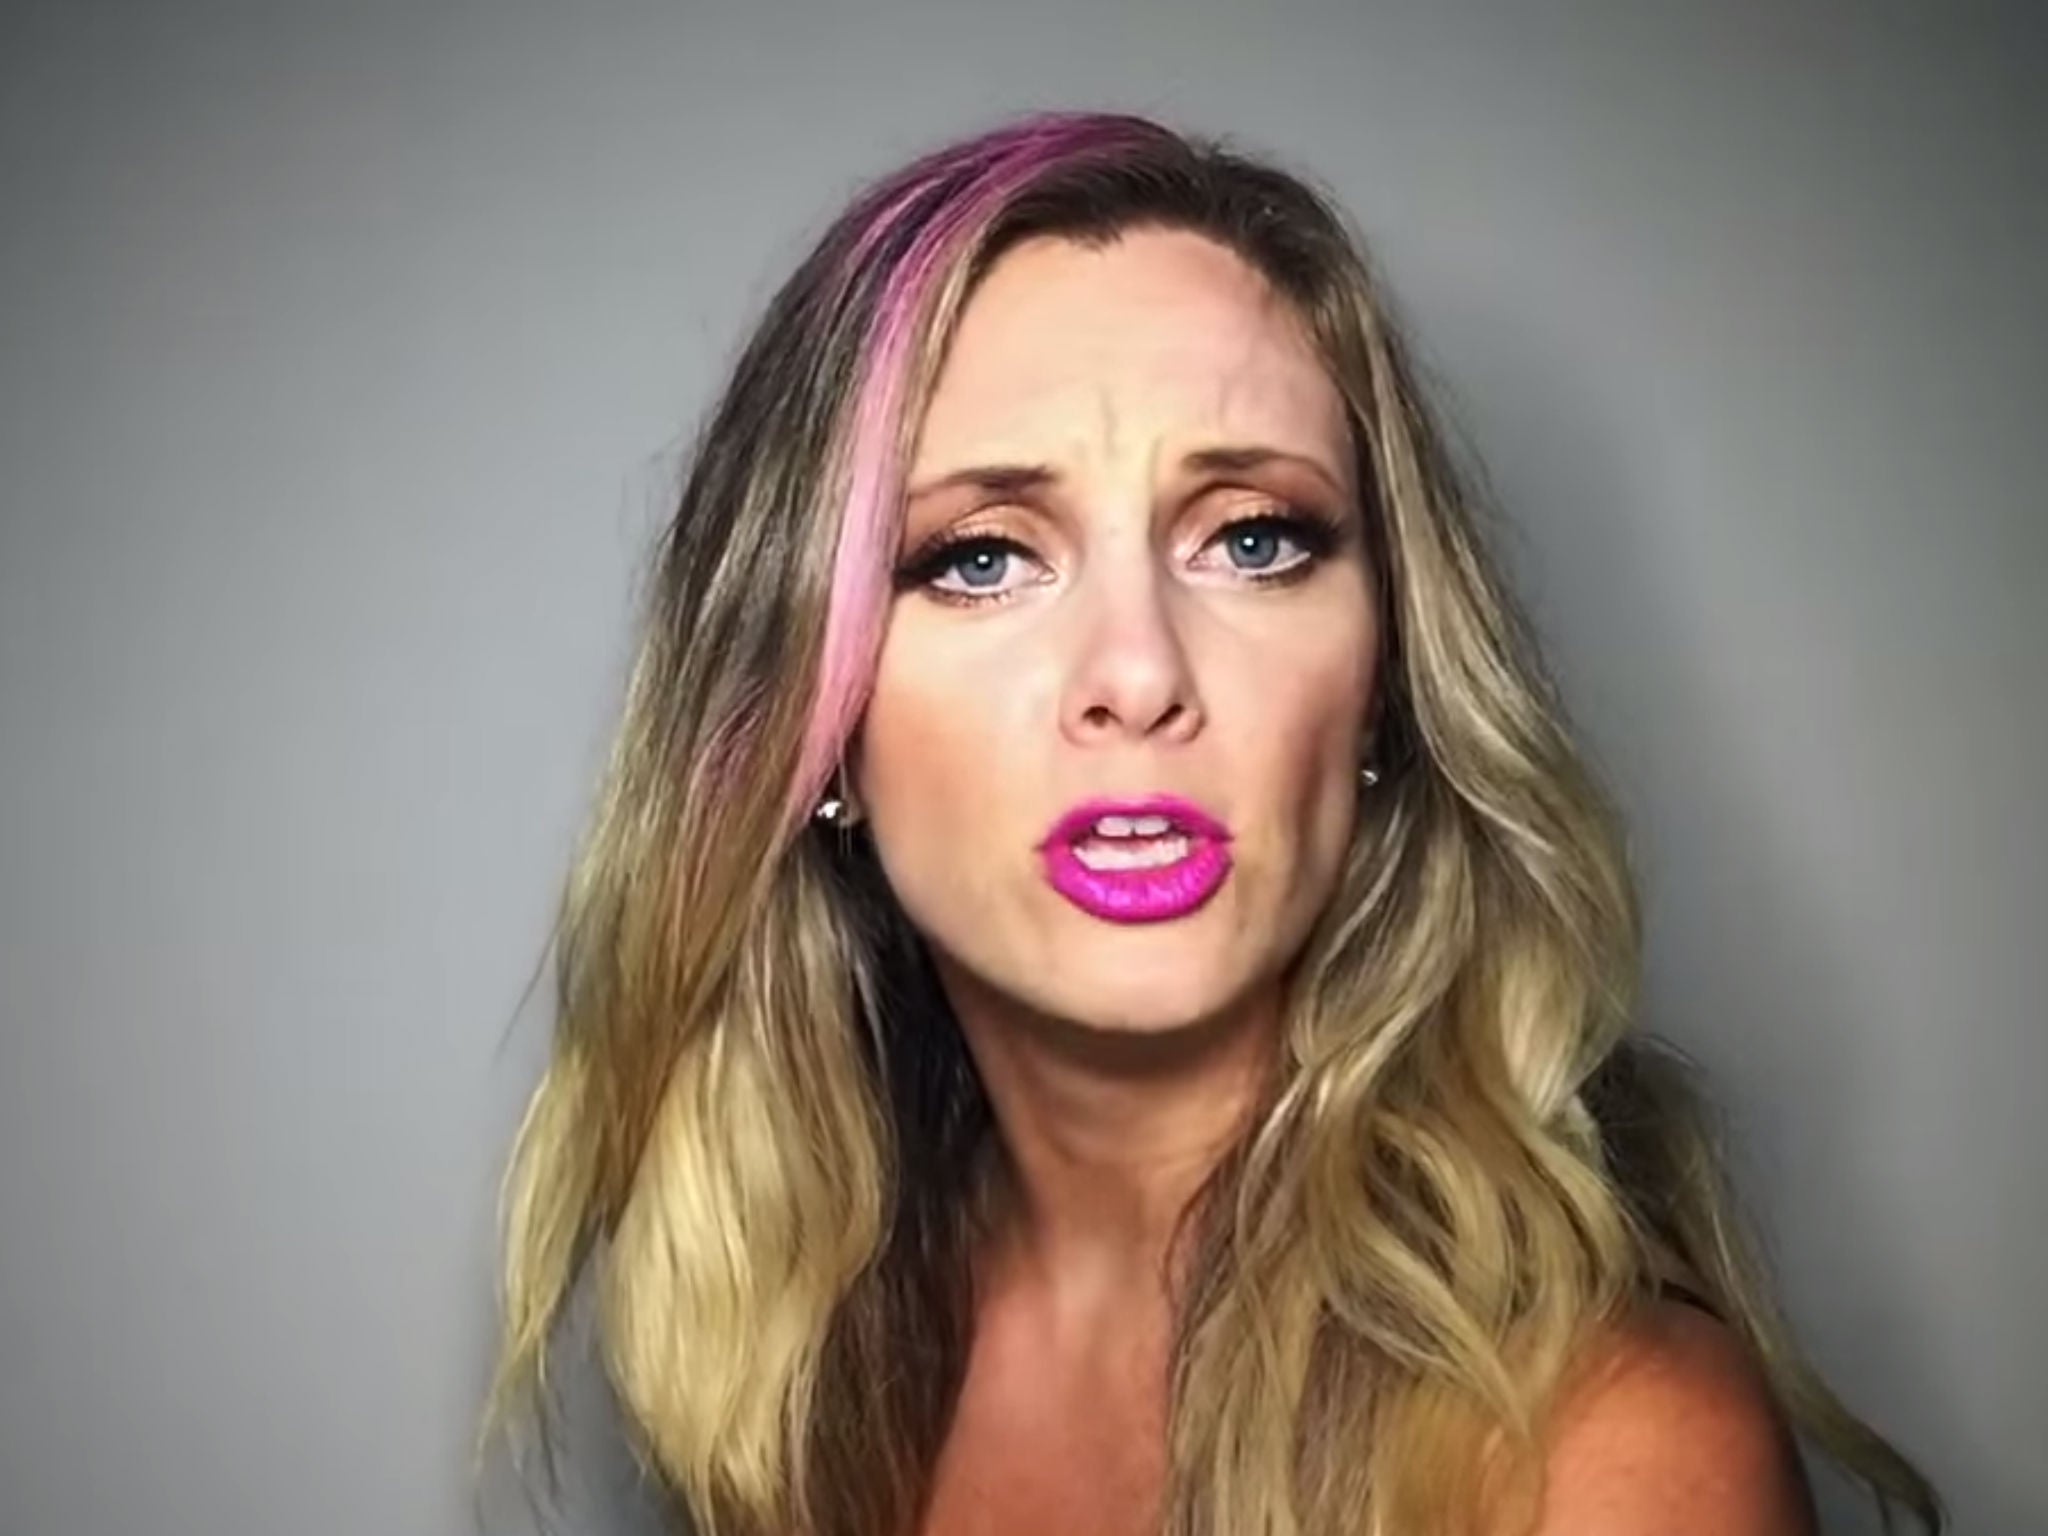 Nicole Arbour, as someone who's been fat-shamed, let me tell ...